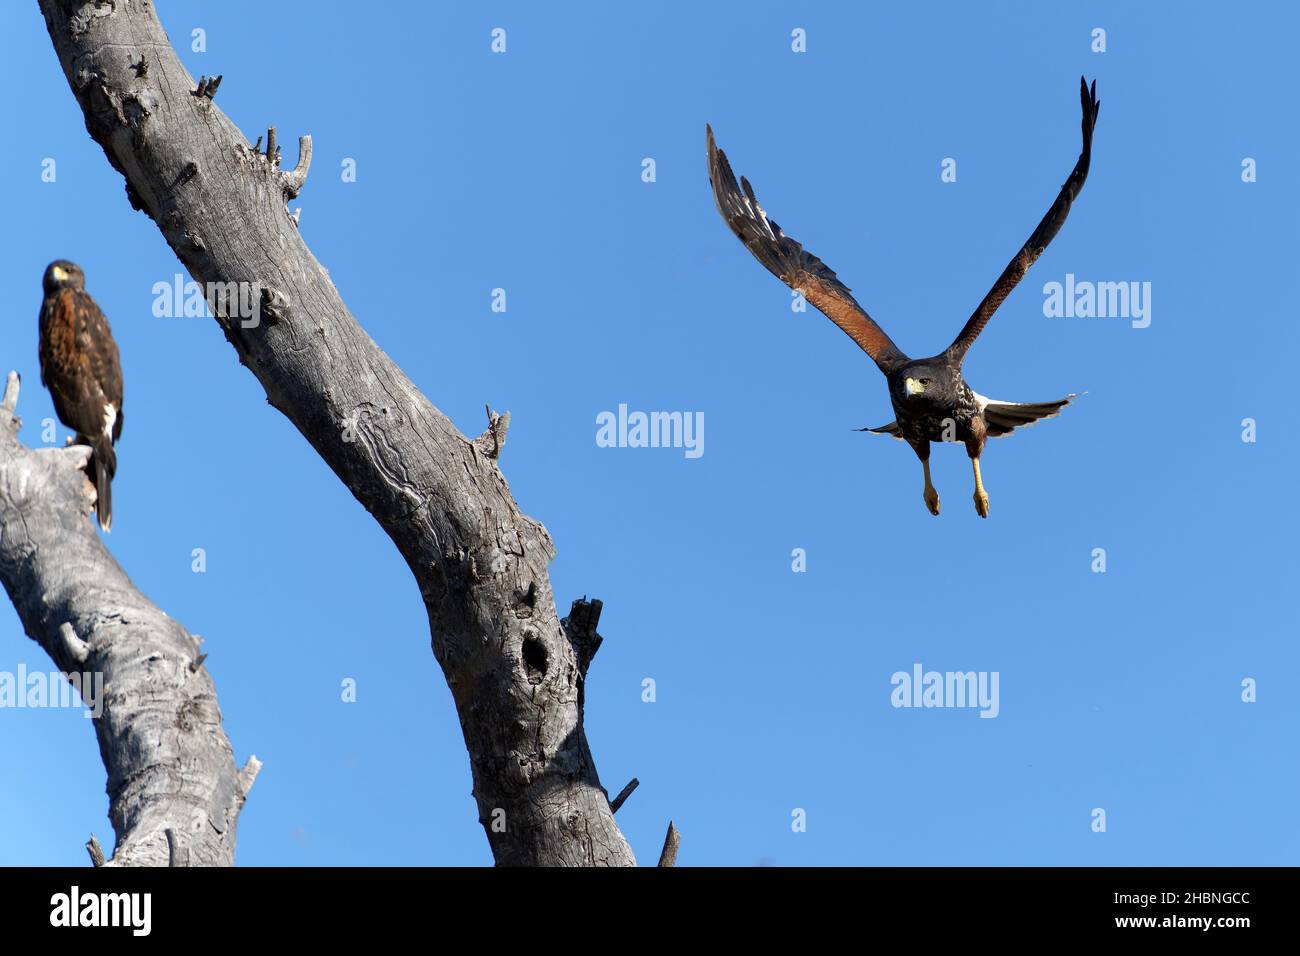 An eagle approaching its pair perched on a branch Stock Photo